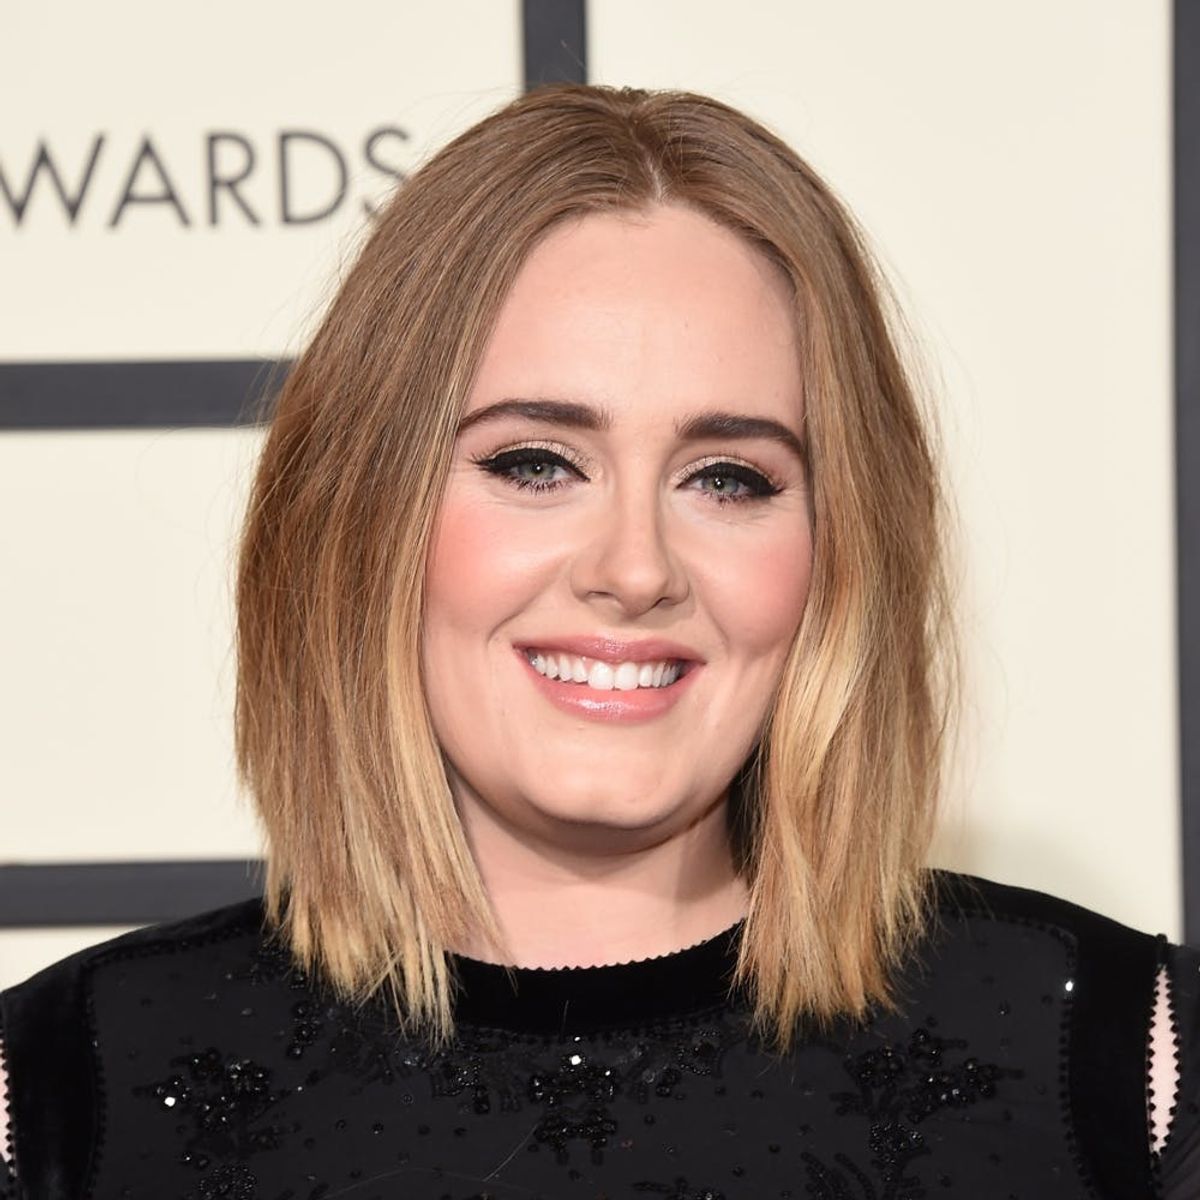 Adele Forgot the Words to Her Own Song + Her Reaction Was Priceless